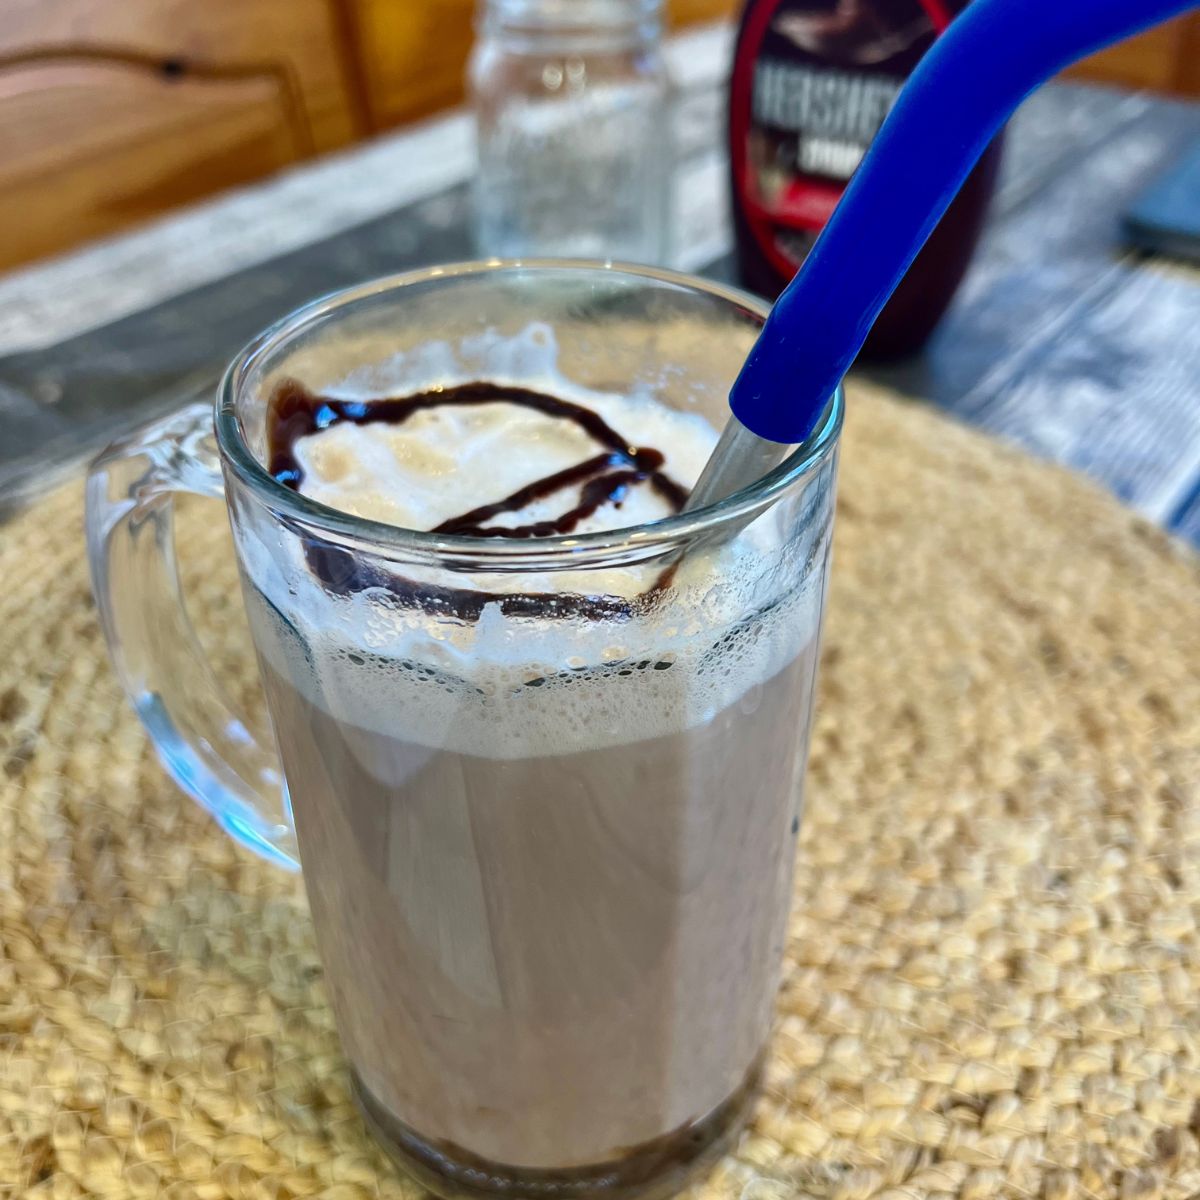 Homemade chocolate egg cream in a glass beer mug on a wooden table